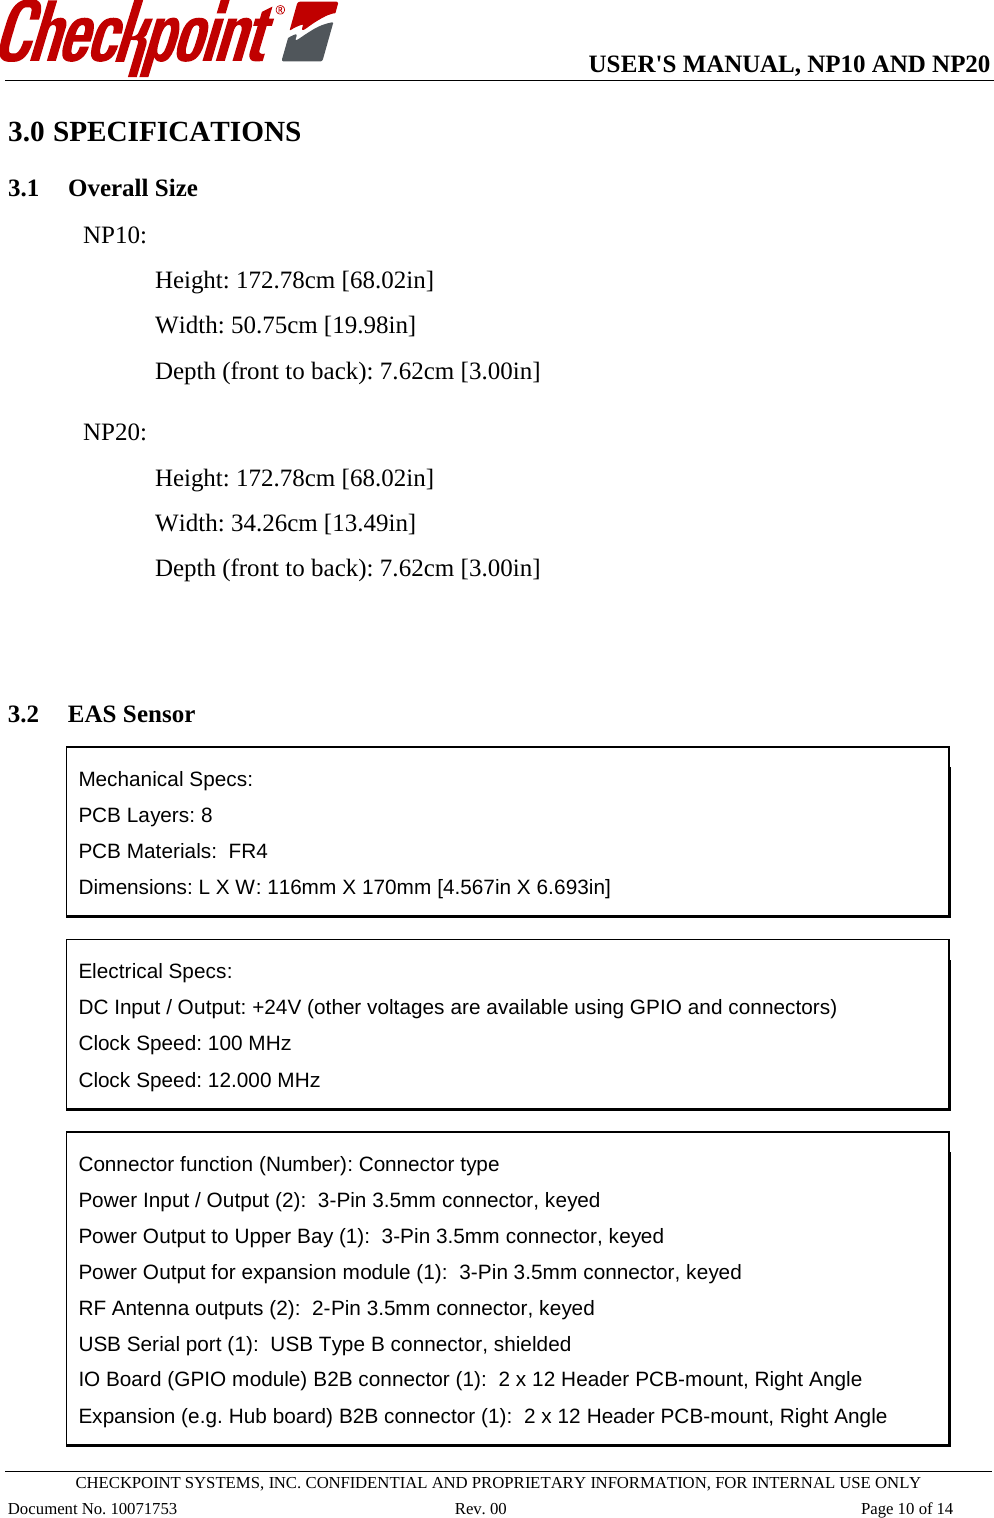   USER&apos;S MANUAL, NP10 AND NP20   CHECKPOINT SYSTEMS, INC. CONFIDENTIAL AND PROPRIETARY INFORMATION, FOR INTERNAL USE ONLY Document No. 10071753 Rev. 00 Page 10 of 14 3.0 SPECIFICATIONS 3.1 Overall Size NP10:  Height: 172.78cm [68.02in] Width: 50.75cm [19.98in] Depth (front to back): 7.62cm [3.00in]  NP20:  Height: 172.78cm [68.02in] Width: 34.26cm [13.49in] Depth (front to back): 7.62cm [3.00in]   3.2 EAS Sensor  Mechanical Specs: PCB Layers: 8     PCB Materials:  FR4   Dimensions: L X W: 116mm X 170mm [4.567in X 6.693in]   Electrical Specs:  DC Input / Output: +24V (other voltages are available using GPIO and connectors) Clock Speed: 100 MHz Clock Speed: 12.000 MHz    Connector function (Number): Connector type Power Input / Output (2):  3-Pin 3.5mm connector, keyed Power Output to Upper Bay (1):  3-Pin 3.5mm connector, keyed Power Output for expansion module (1):  3-Pin 3.5mm connector, keyed RF Antenna outputs (2):  2-Pin 3.5mm connector, keyed USB Serial port (1):  USB Type B connector, shielded IO Board (GPIO module) B2B connector (1):  2 x 12 Header PCB-mount, Right Angle   Expansion (e.g. Hub board) B2B connector (1):  2 x 12 Header PCB-mount, Right Angle  